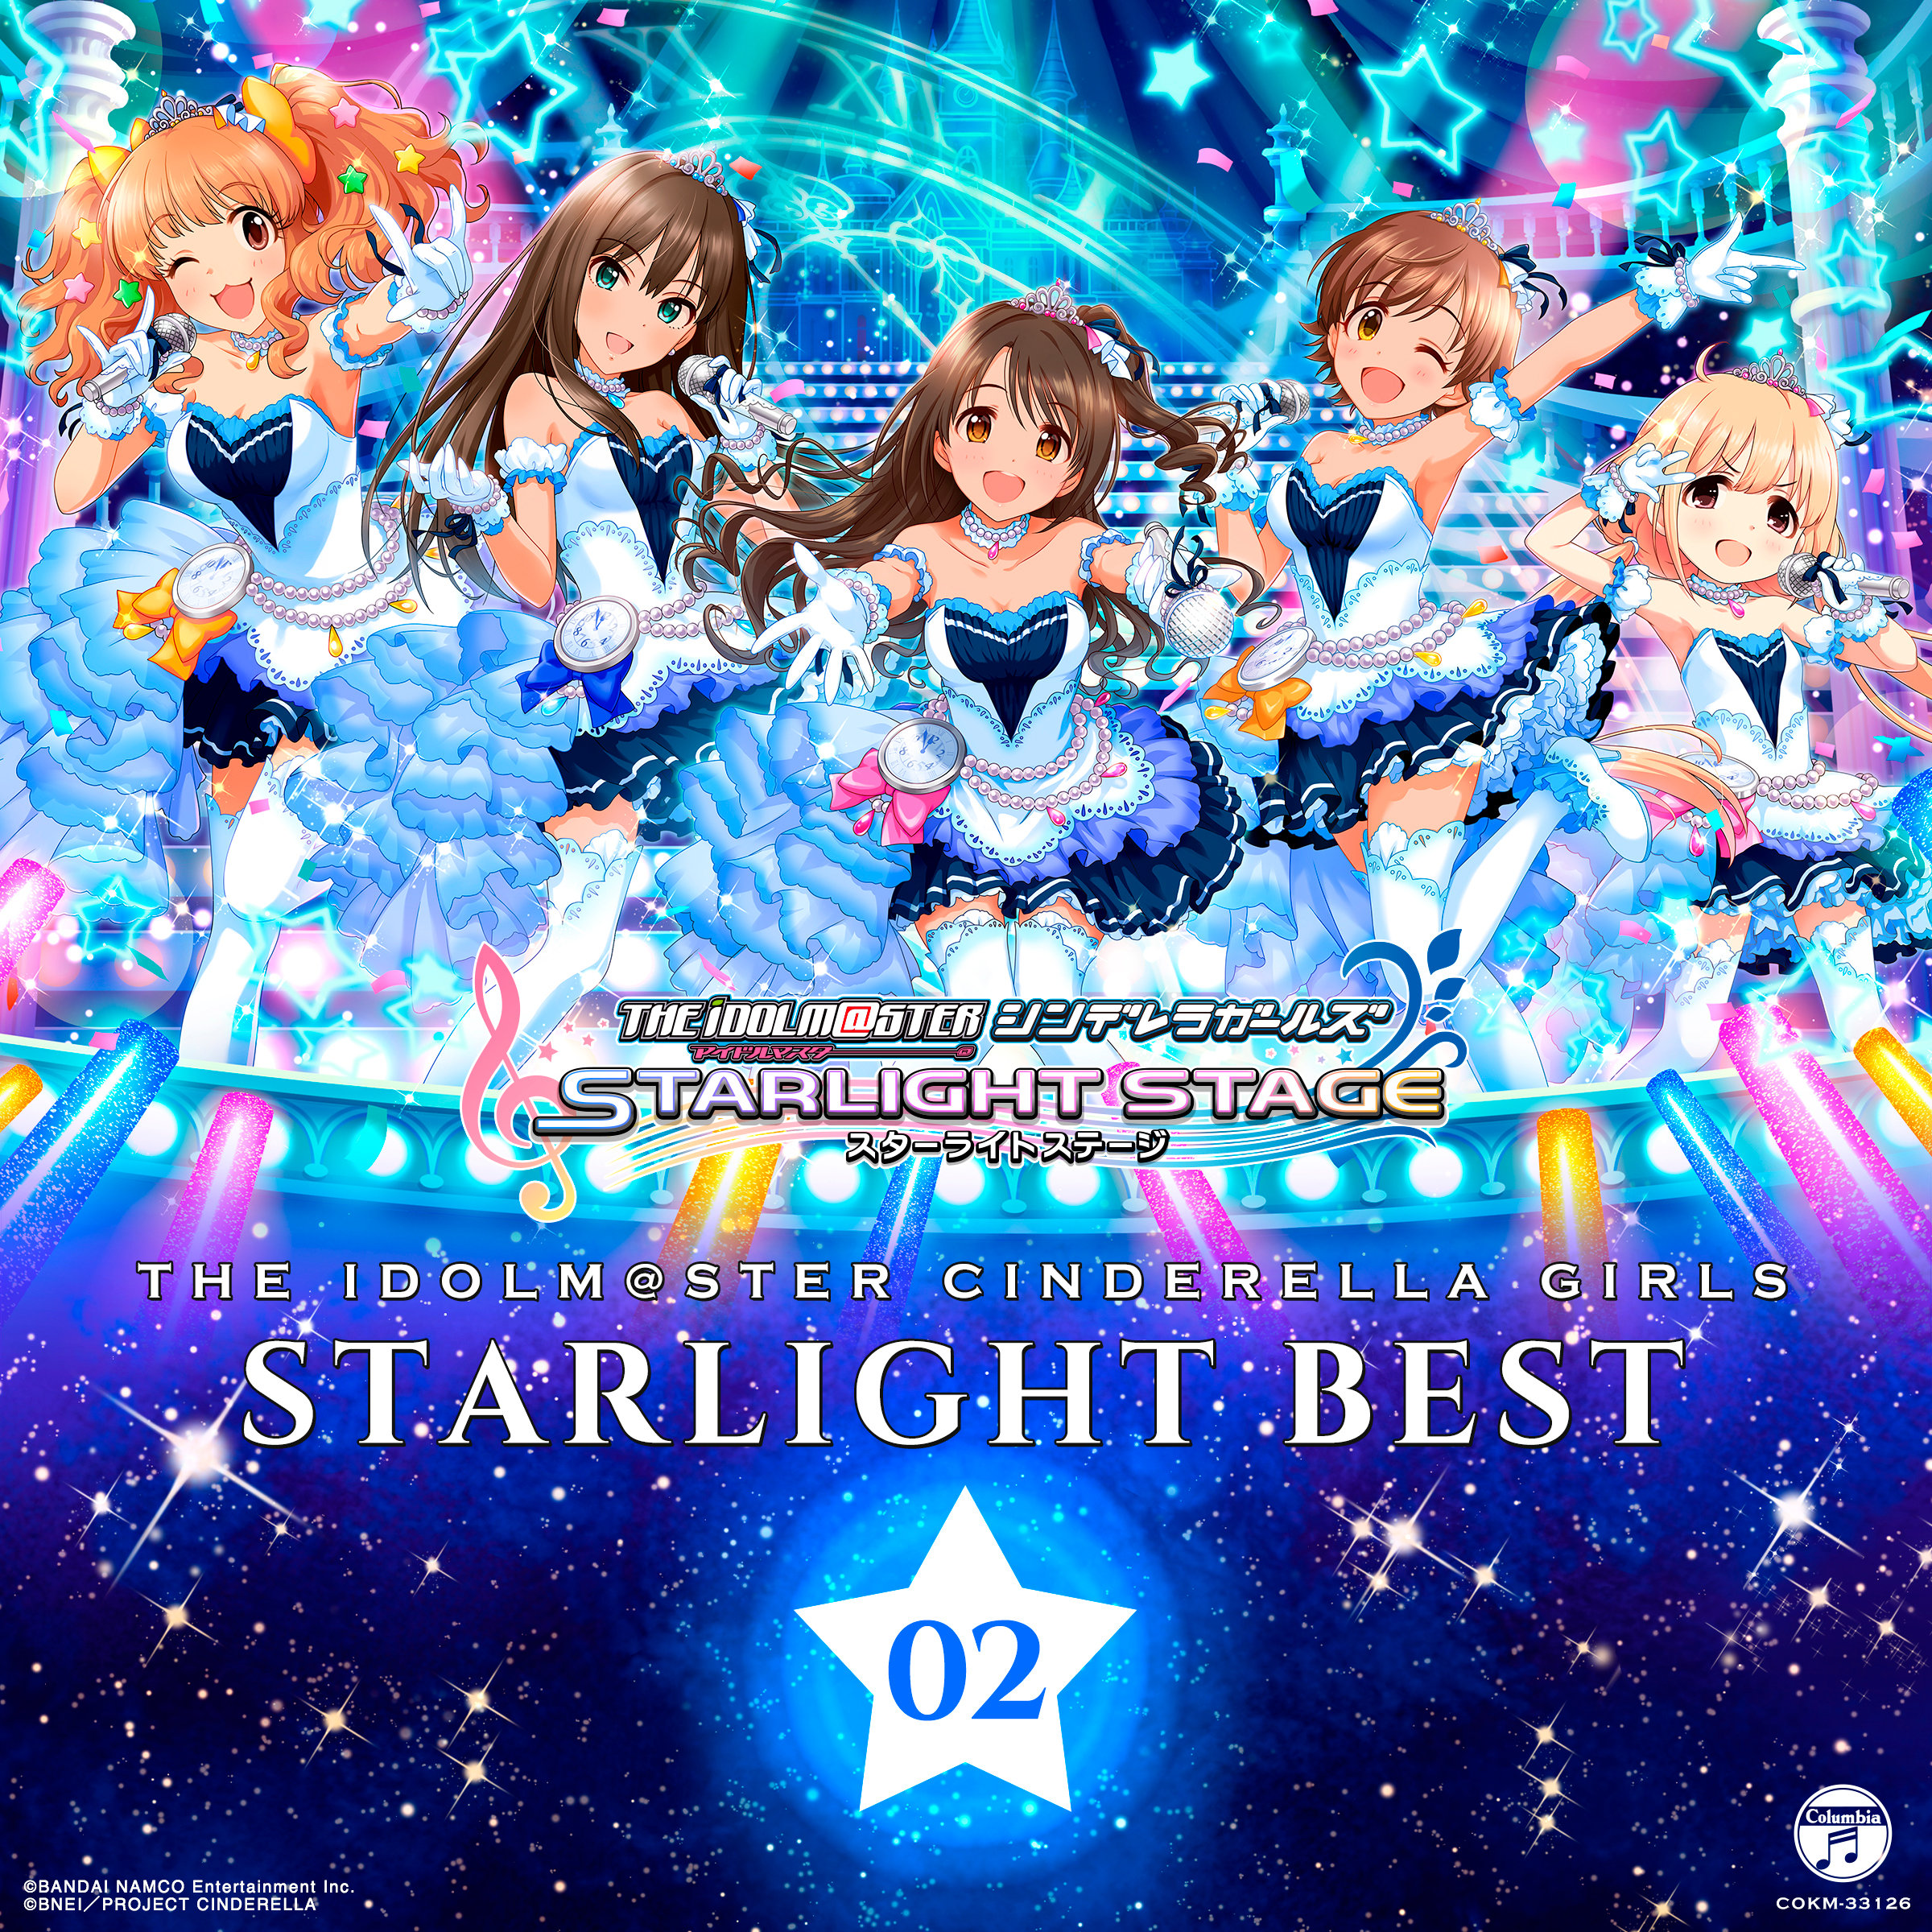 The IDOLM@STER Cinderella girls. The IDOLM@STER Cinderella girls: Starlight Stage. Cinderella girls Starlight Stage. The IDOLM@STER Cinderella girls Starlight.